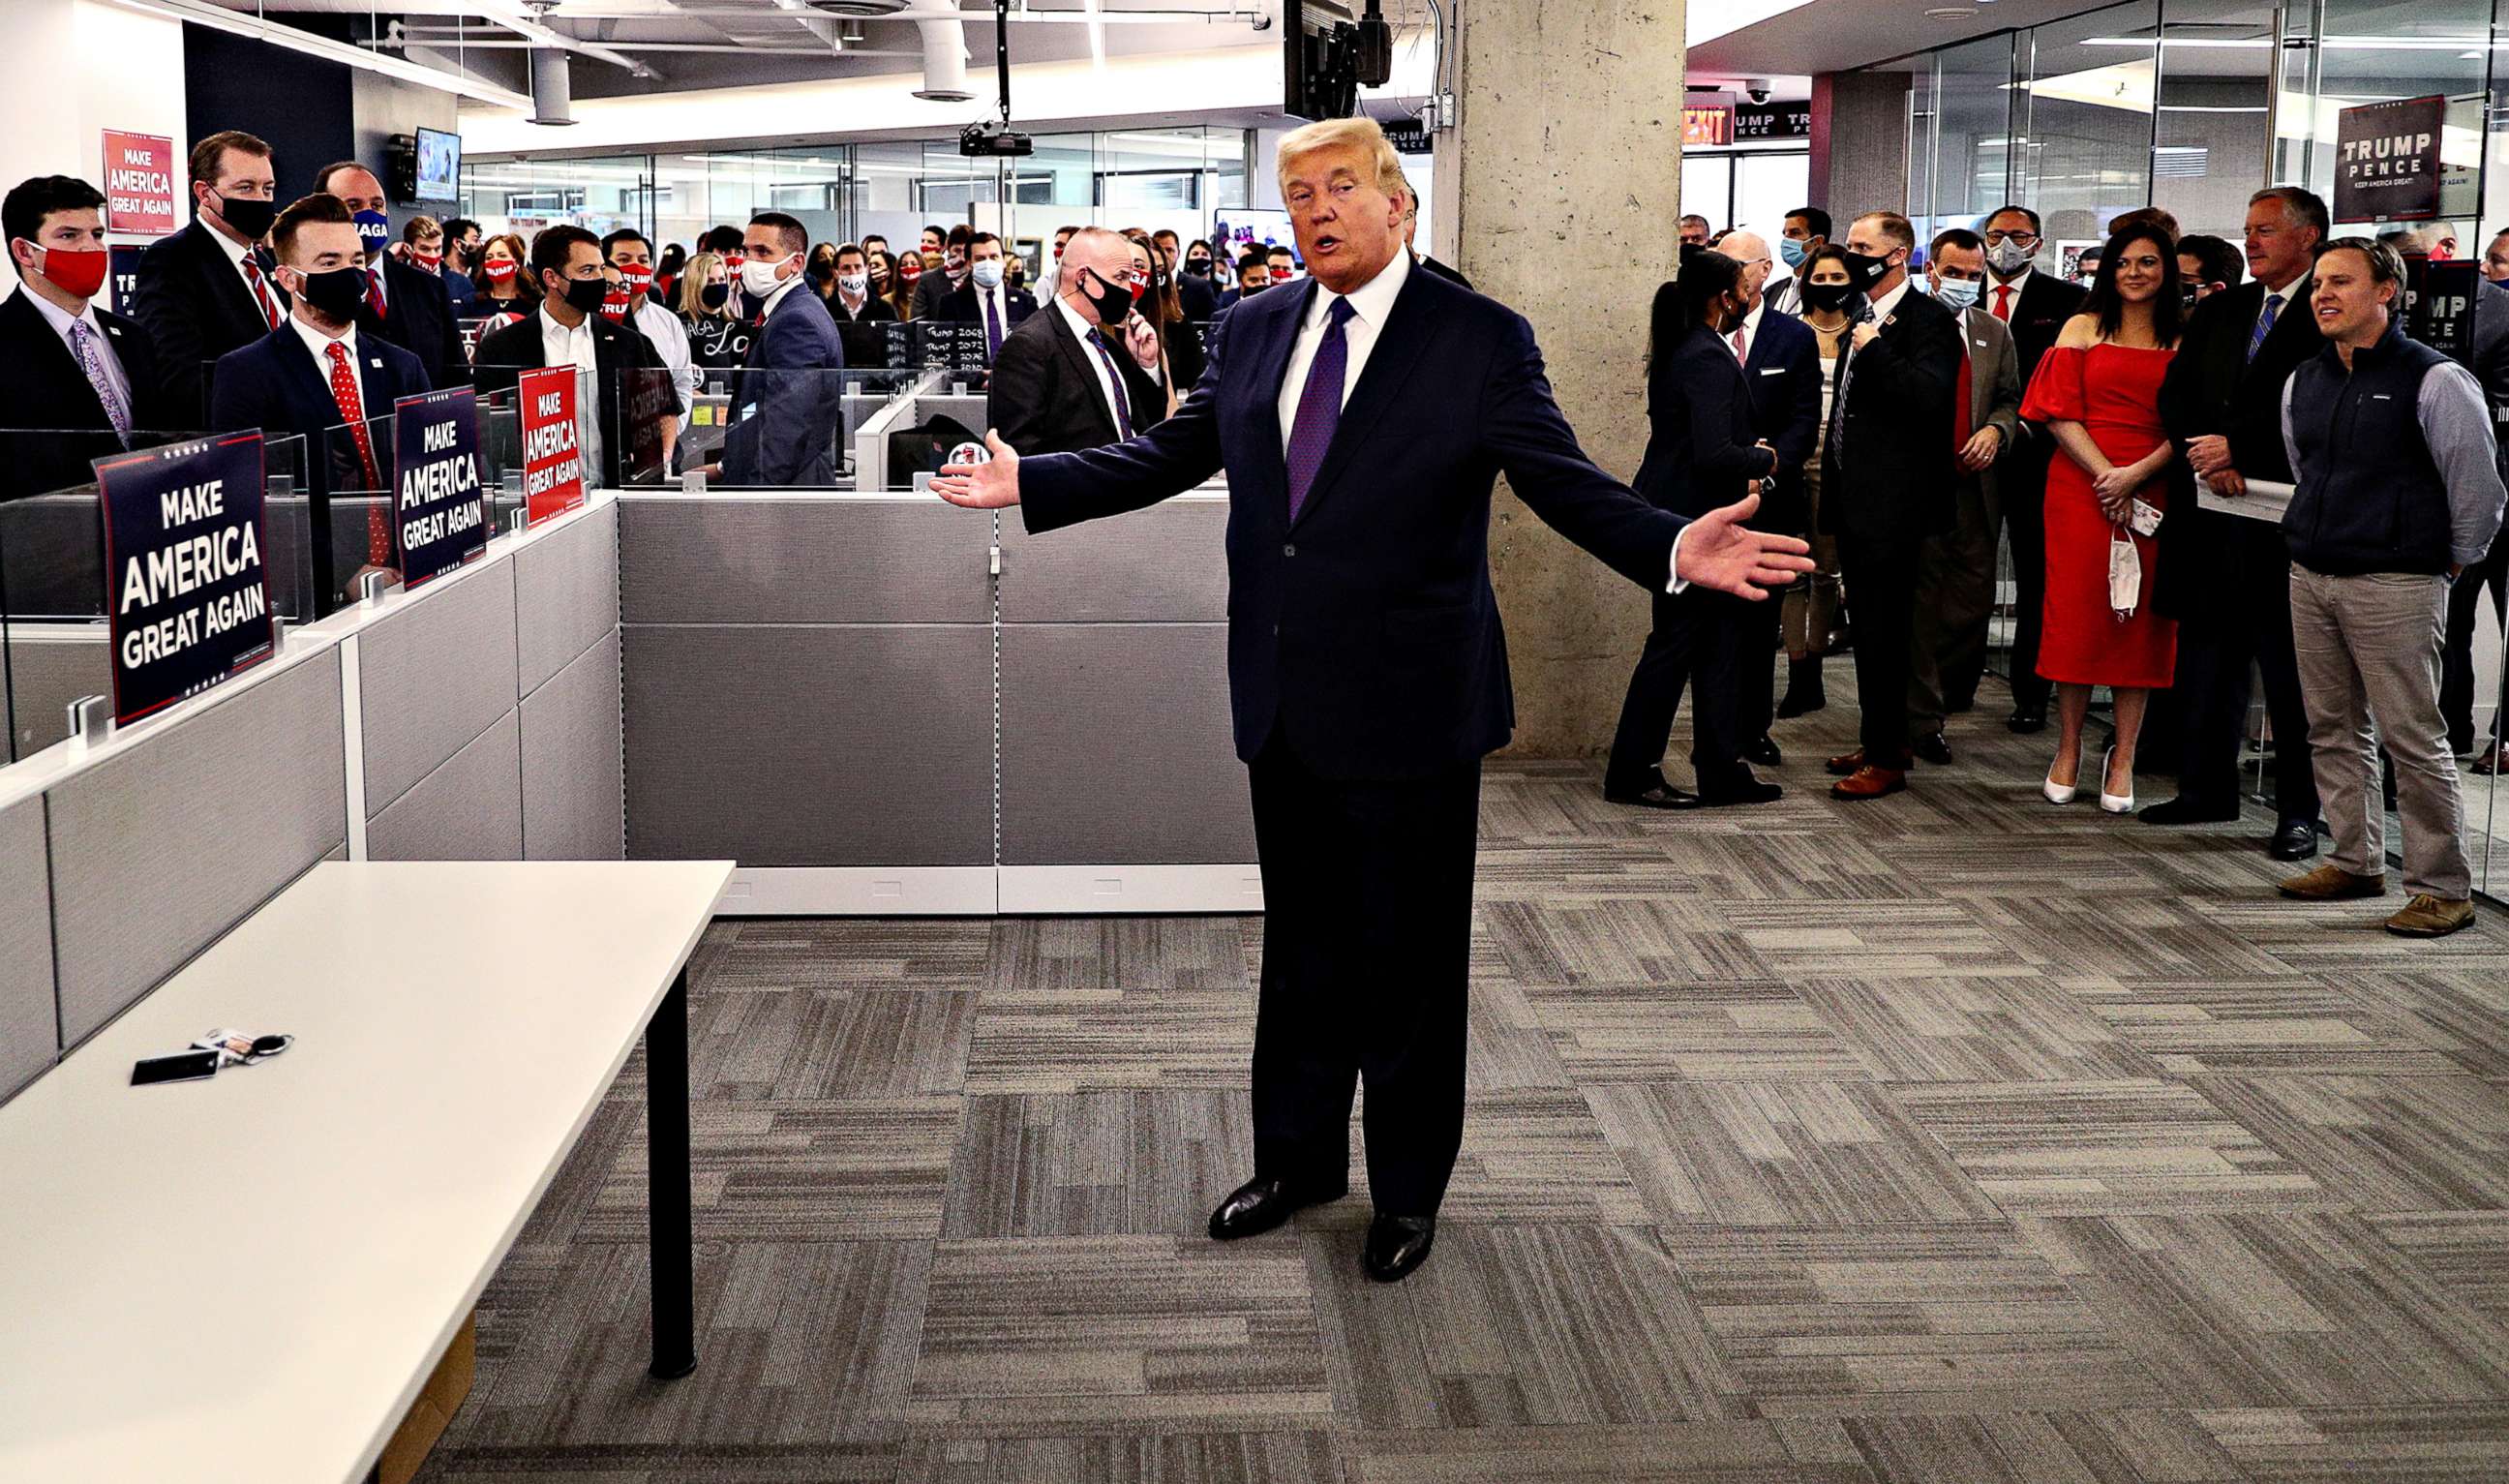 PHOTO: President Donald Trump greets staff members as he visits his presidential campaign headquarters on Election Day in nearby Arlington, Va., Nov. 3, 2020.